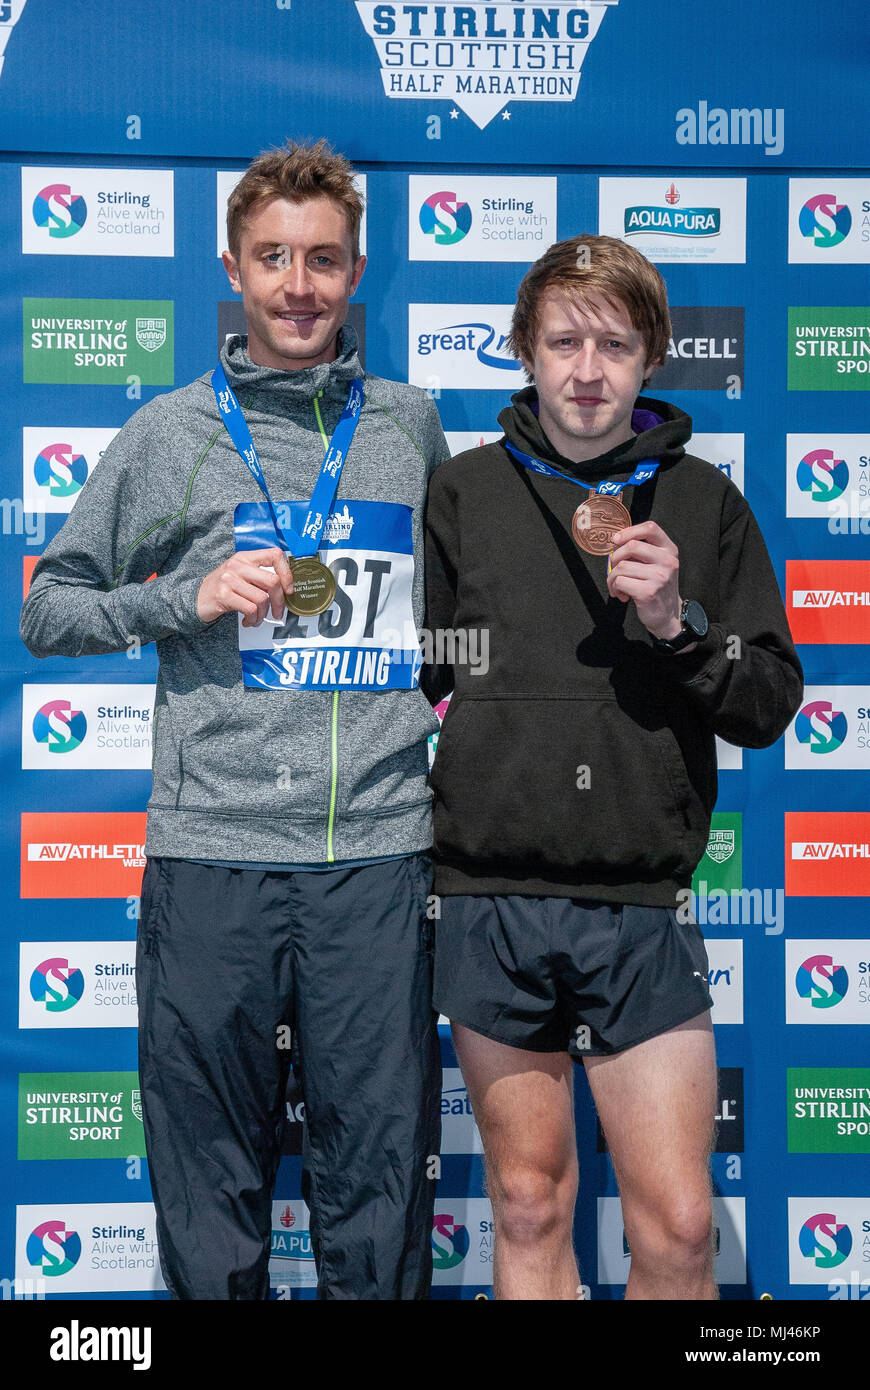 Michael Crawley (C), Jason Kelly (R) pose for photographers on the podium with their medals after completing the 2018 Stirling Scottish Half Marathon. Stock Photo